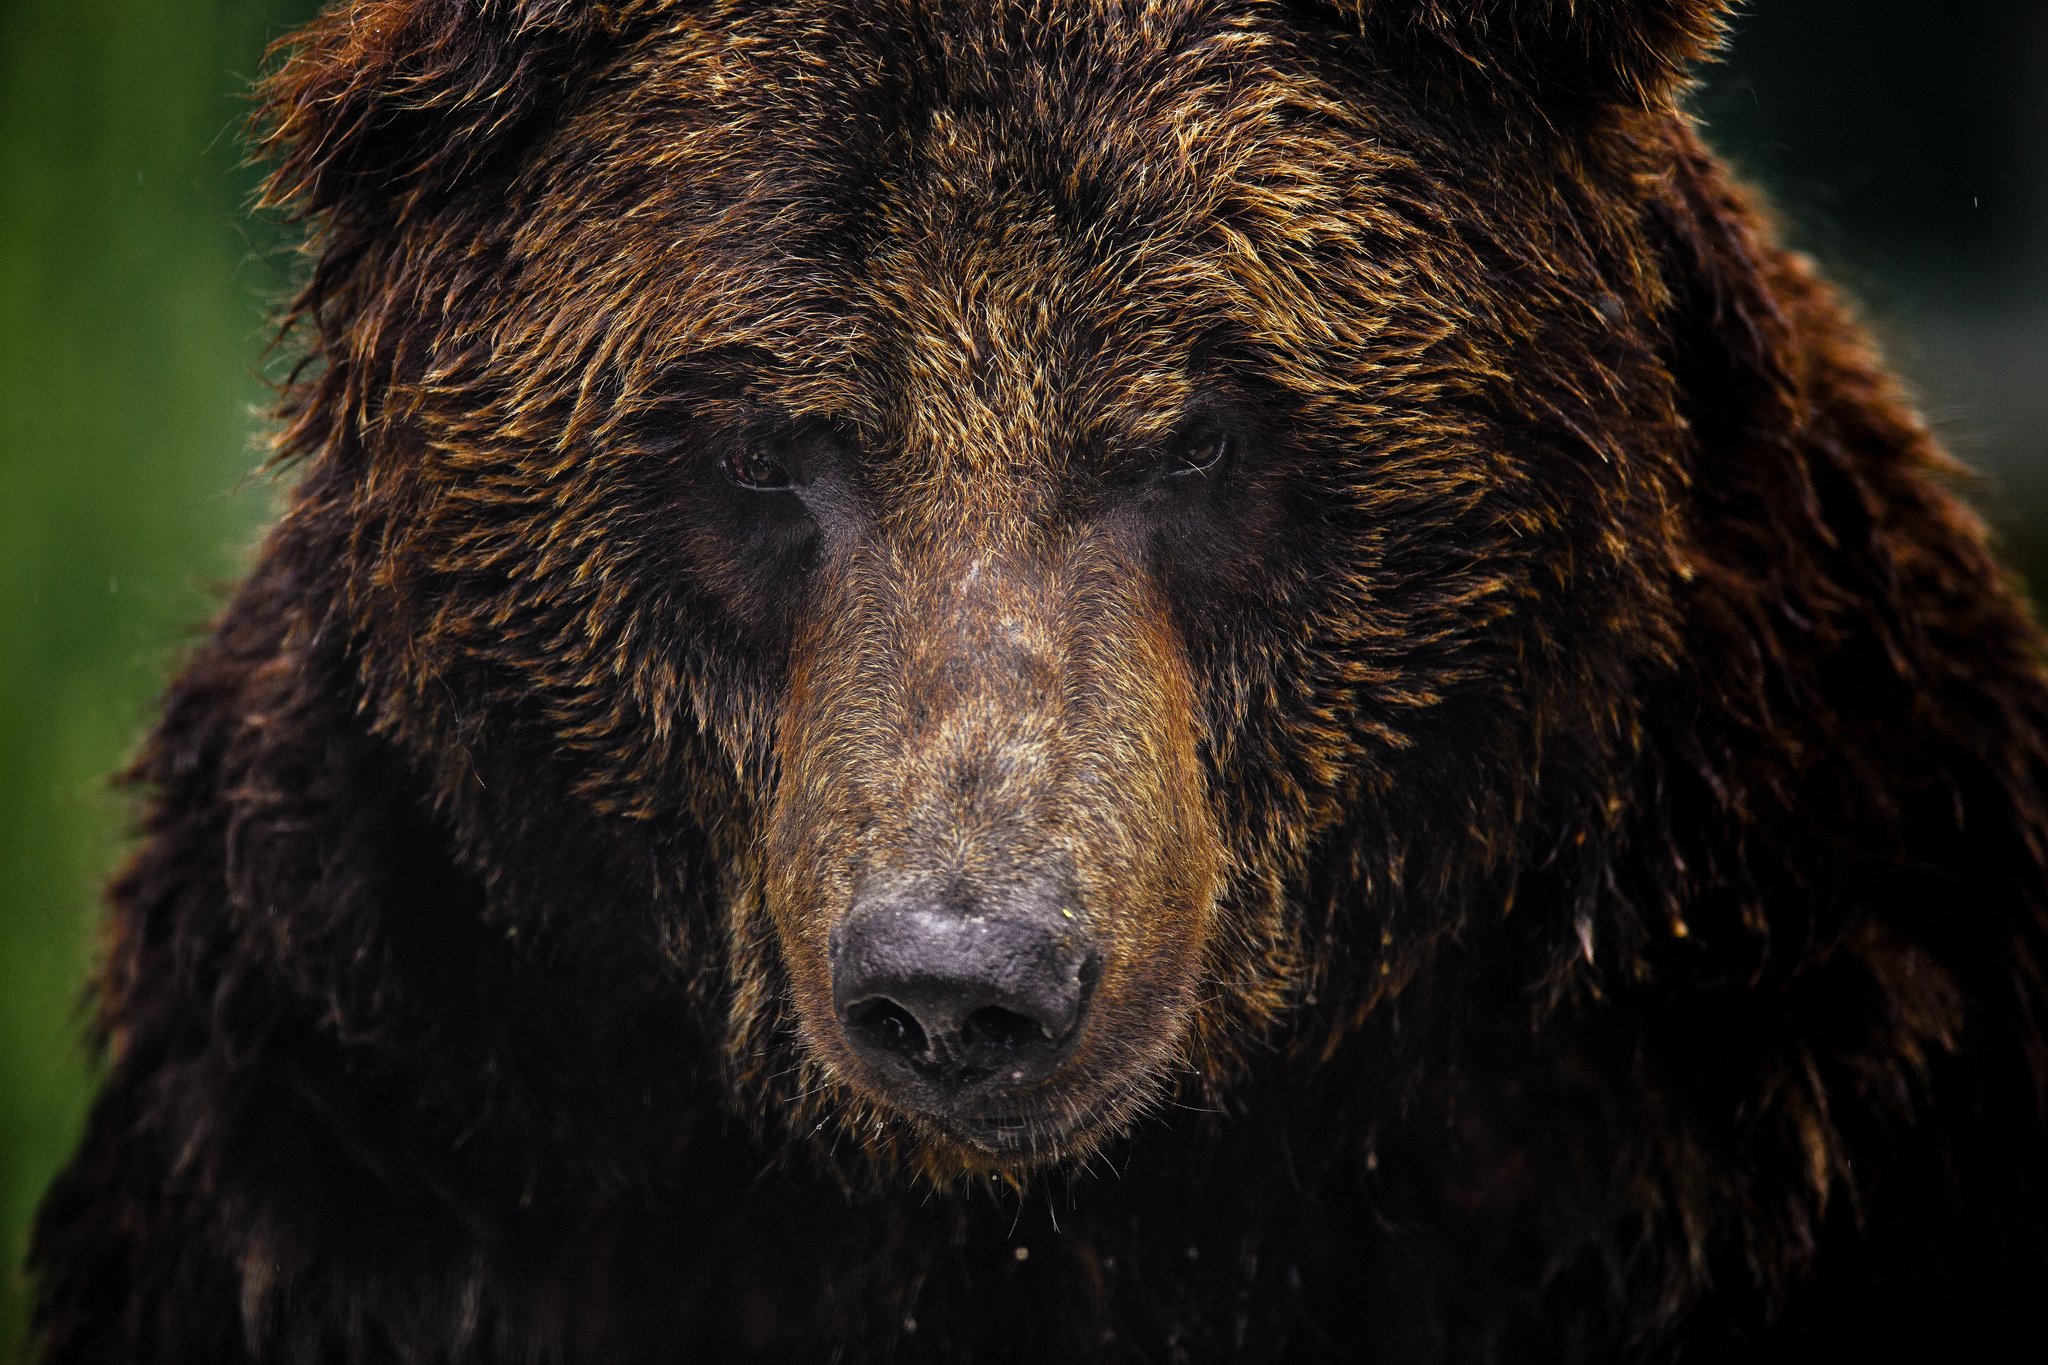 animals, Bears, Brown, Bear, Closeup, Conservation, Endangered, Species, Face, Green, Field, Grizzly, Grizzly, Bear, North, America, North, American, Brown, Bear, Wild, Zoo Wallpaper